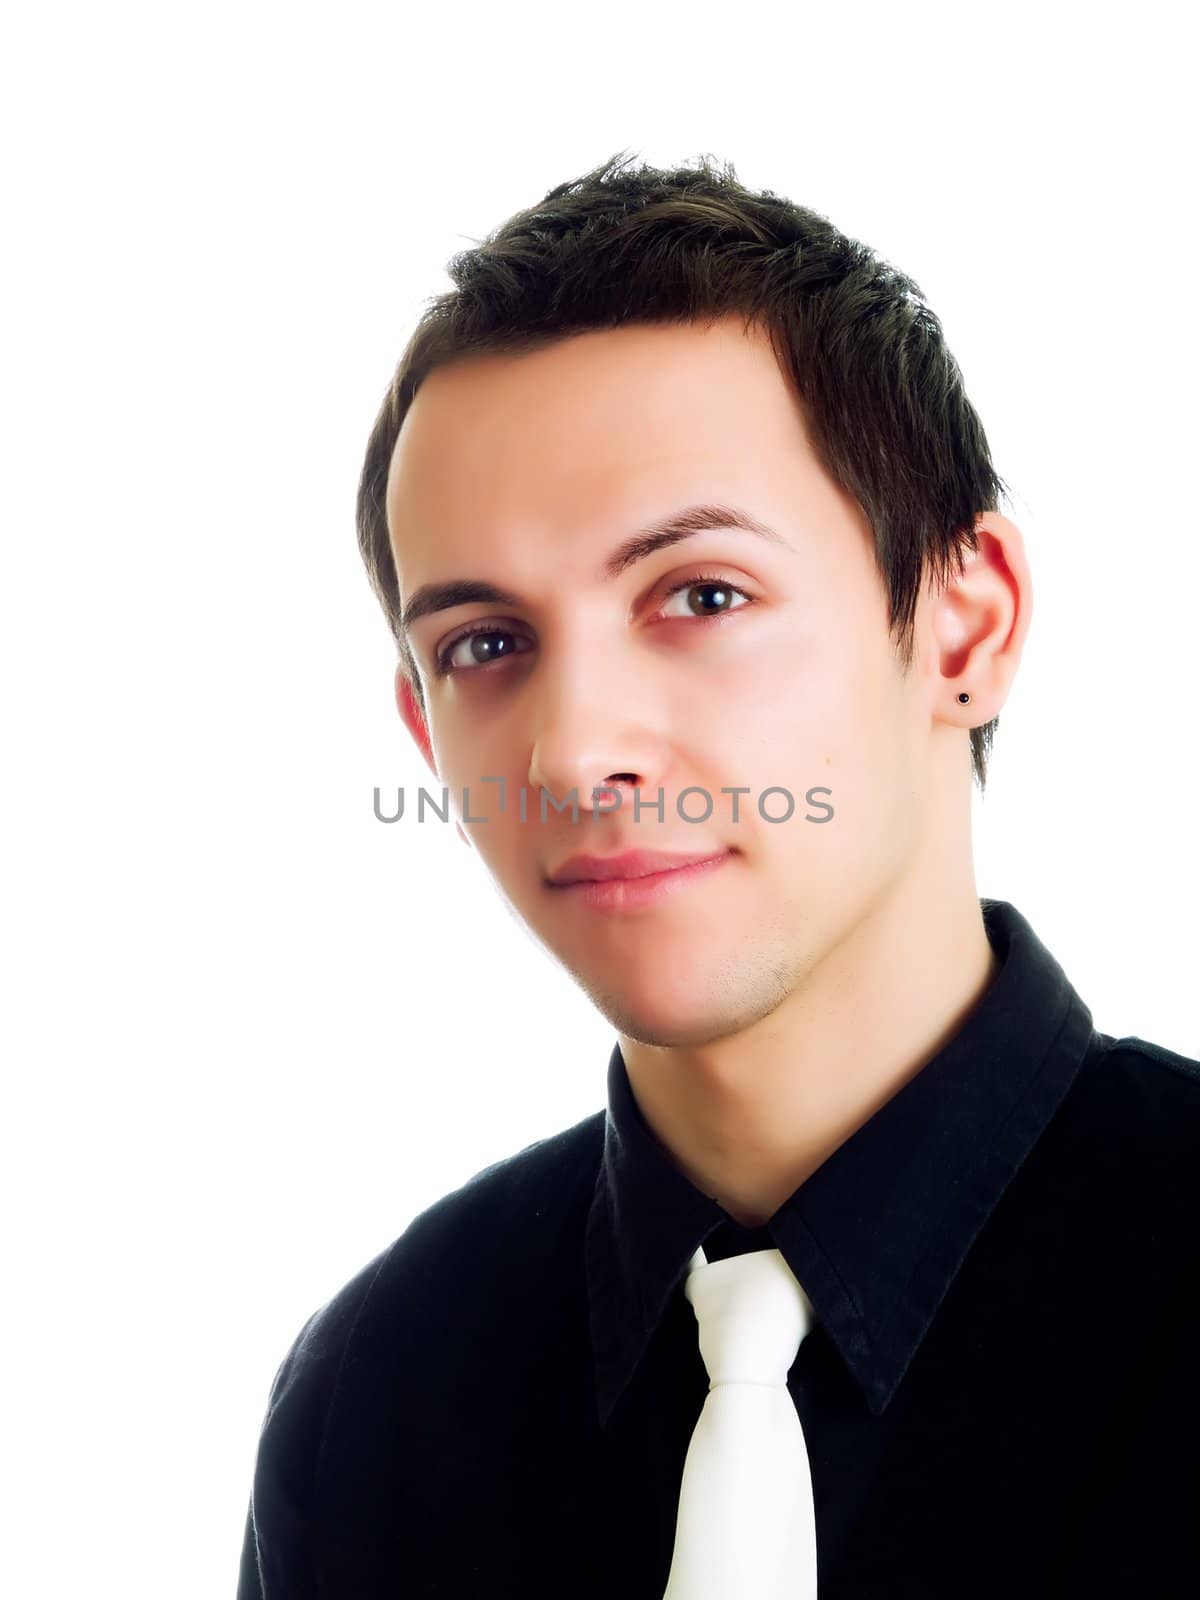 Young businessman smiling, on a white background